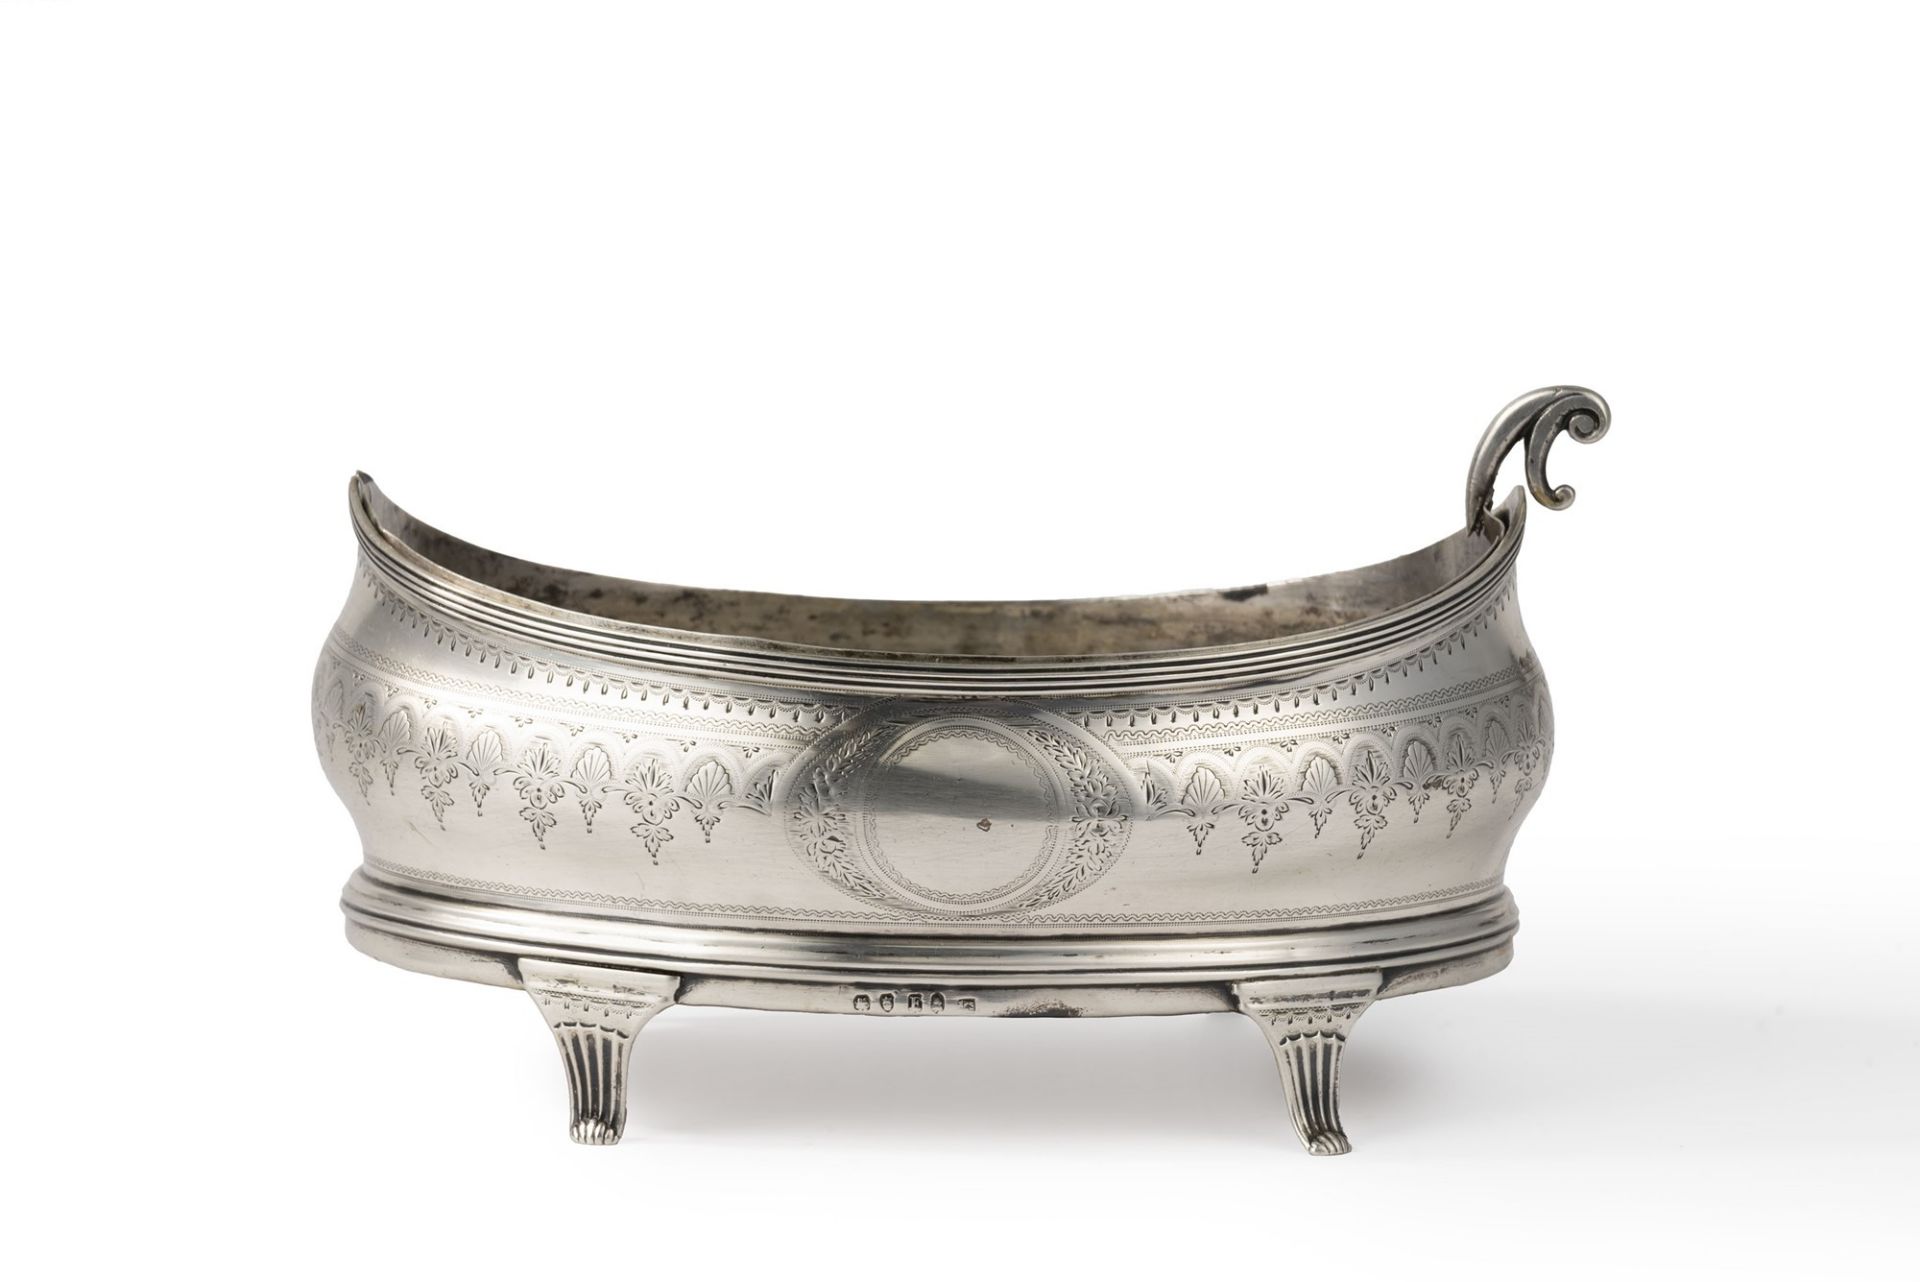 Centerpiece in silver and wood, London, England, early 19th century